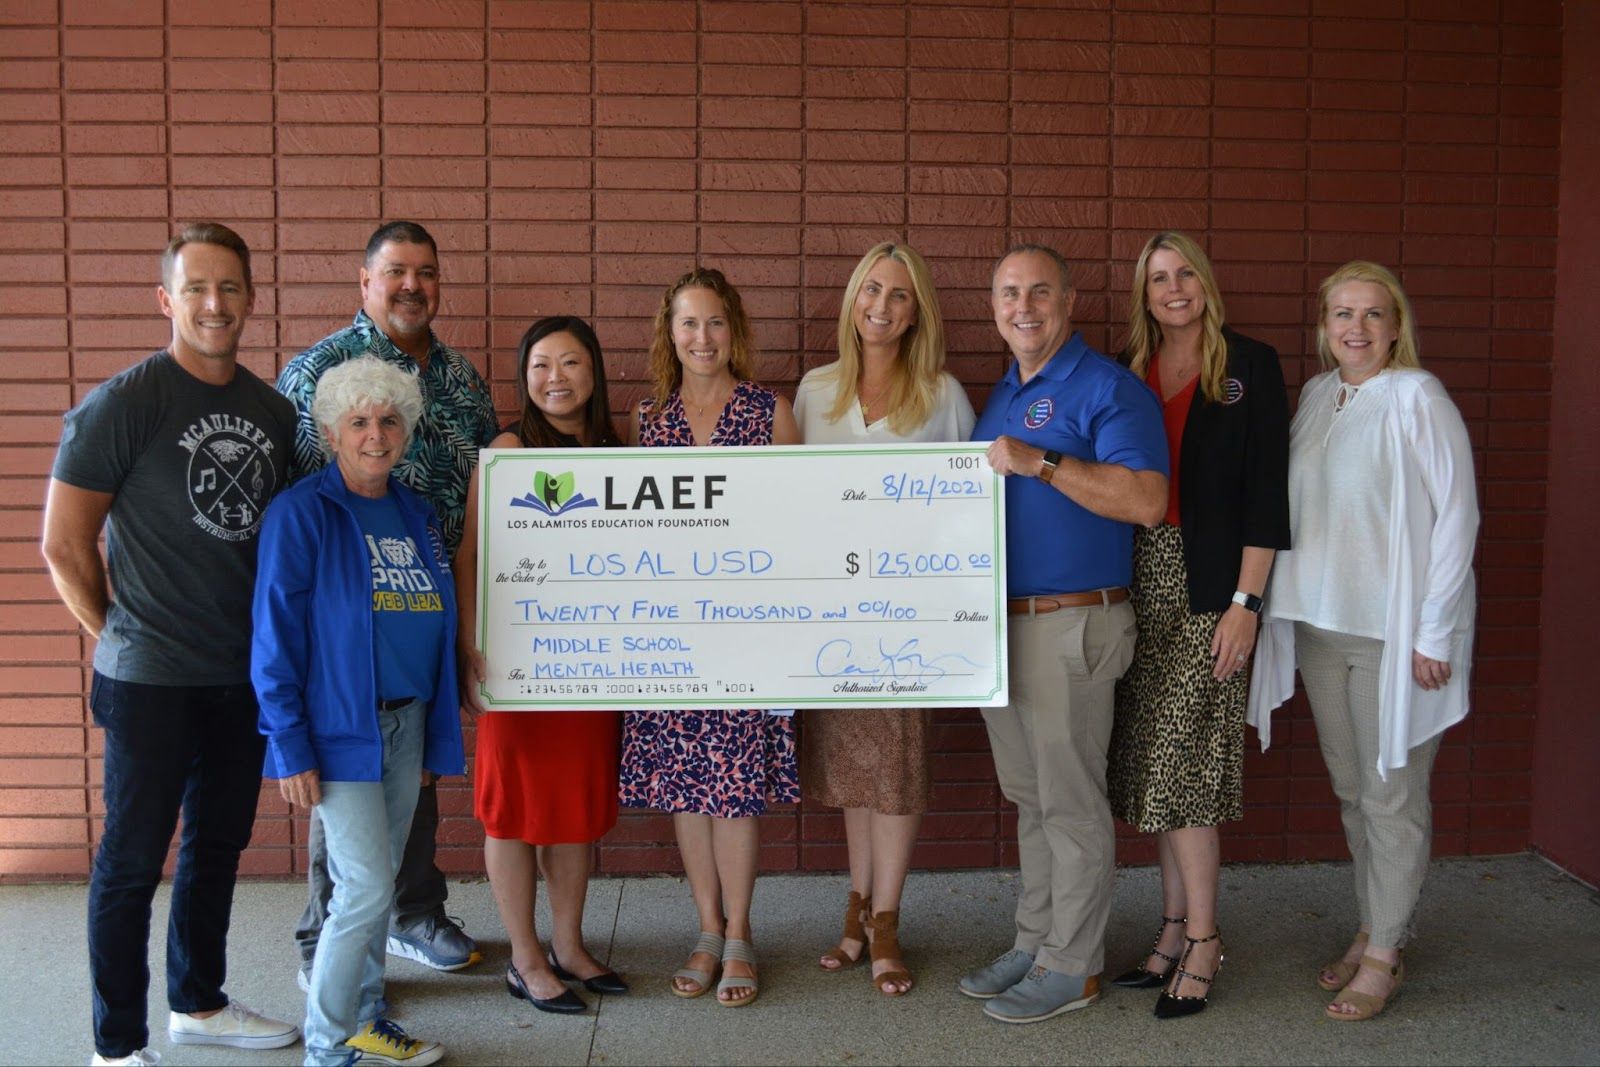 Since 2017, LAEF has donated more than $150,000 to support student wellness and mental health including helping pay for salaries of counselors and for the construction of WellSpaces at the district's campuses. Courtesy photo.